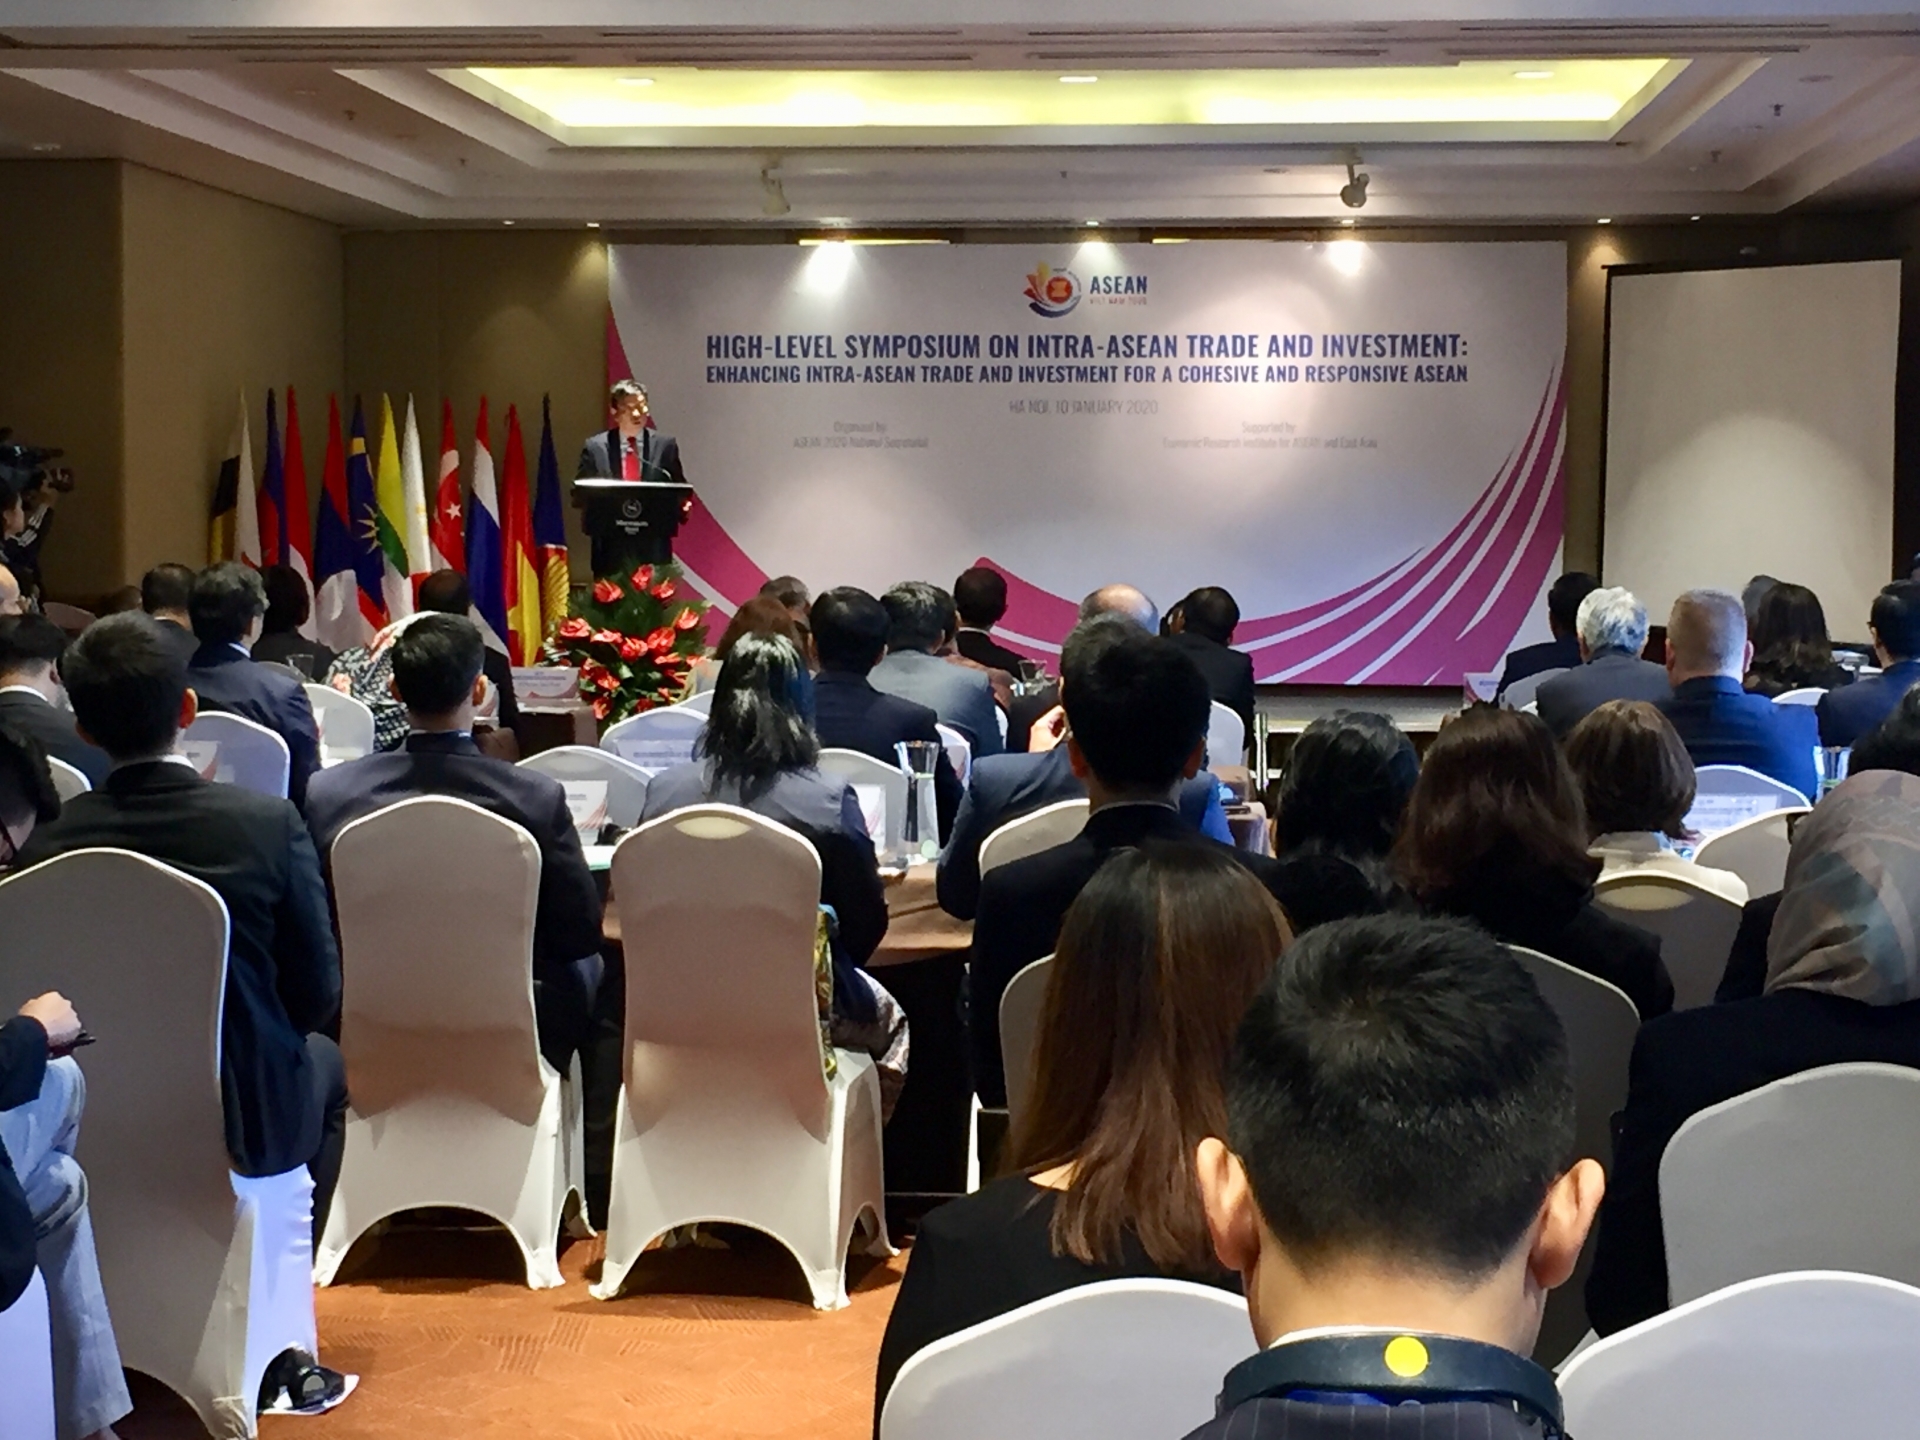 Policymakers gather for symposium on intra-ASEAN trade in Hanoi